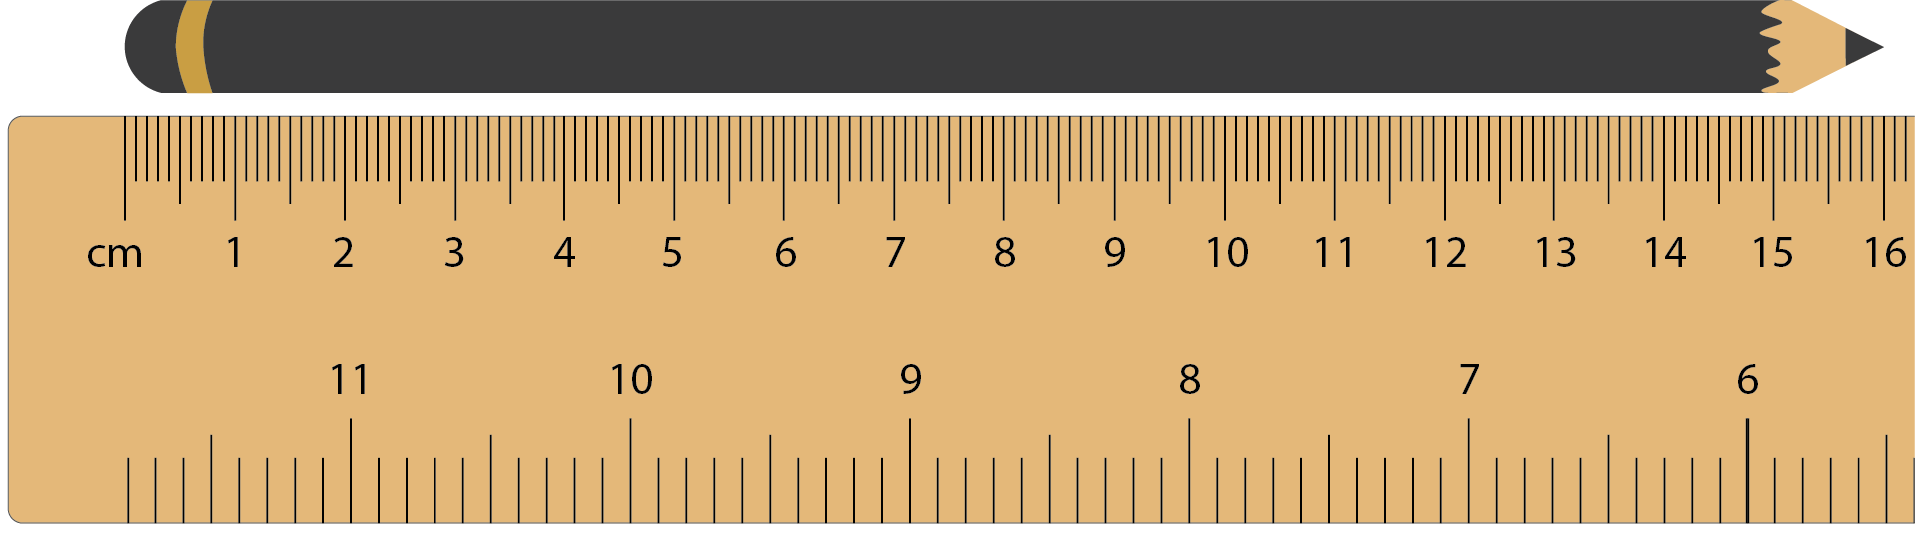 Image of a ruler being used to measure the length of a pencil. 